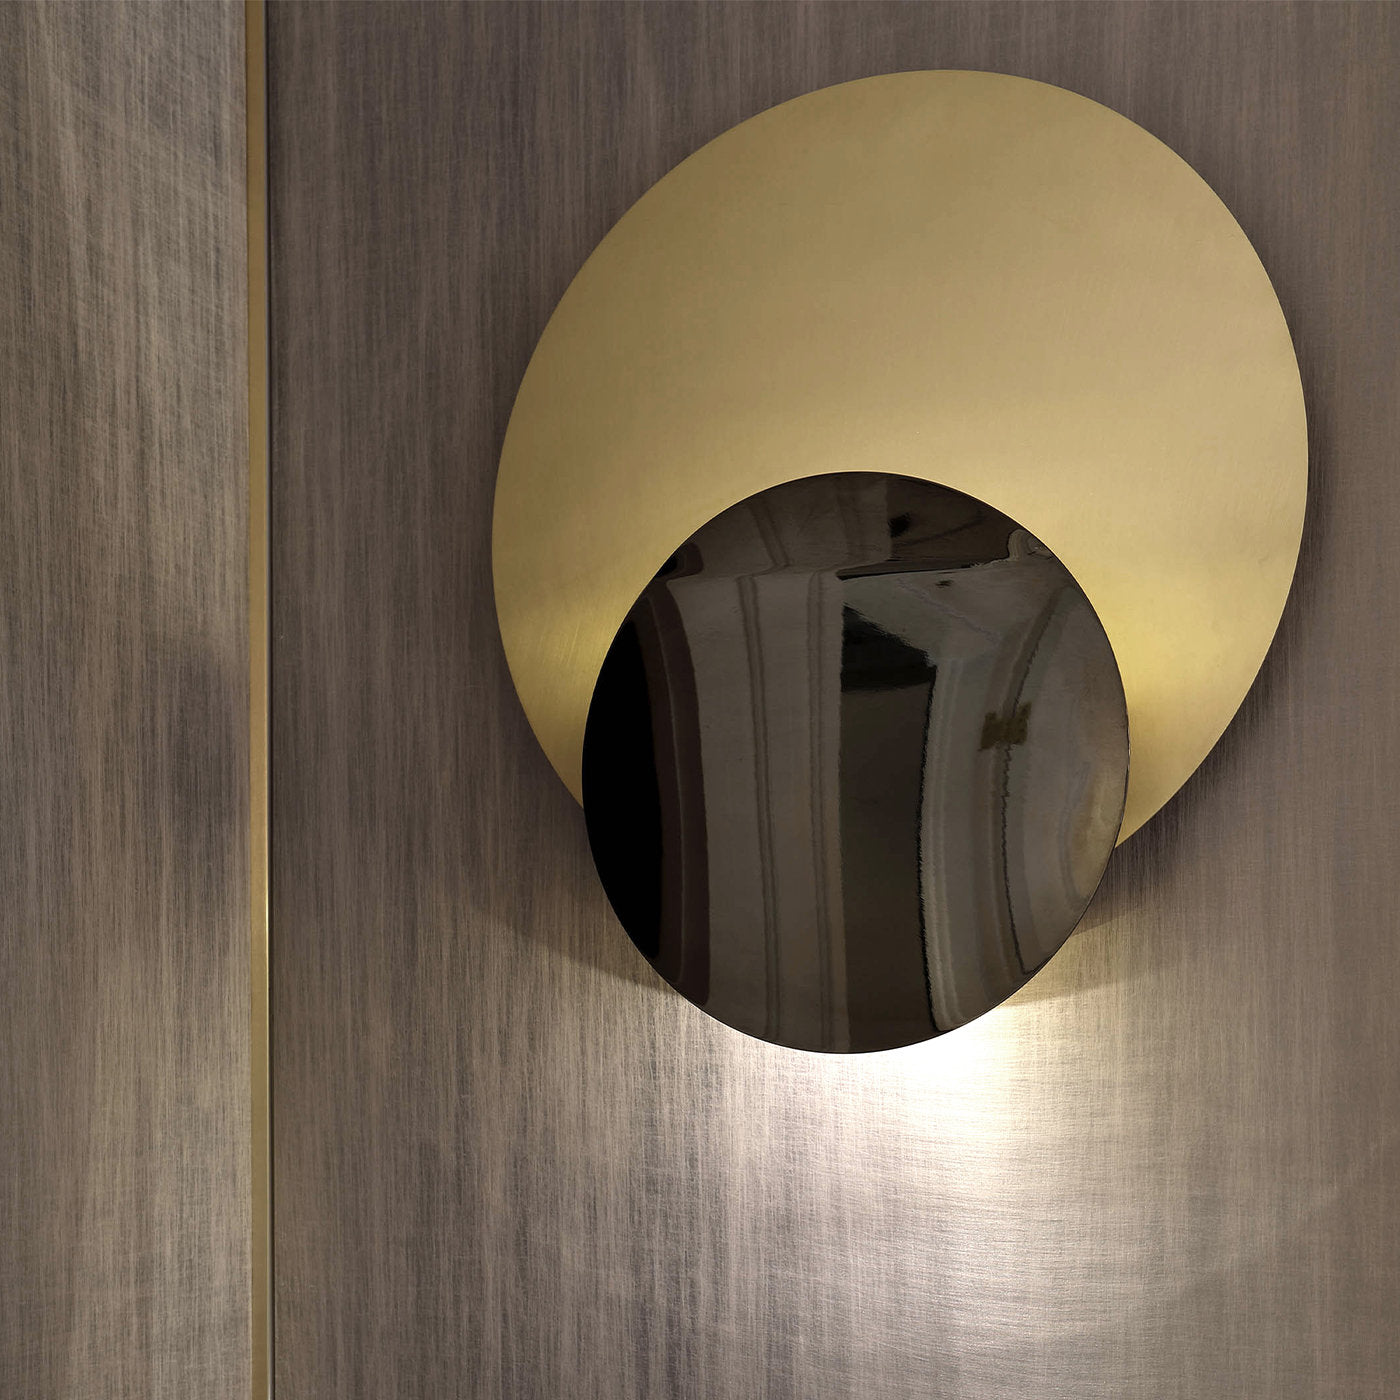 Scur & Ciar Sconce by Isacco Brioschi - Alternative view 1